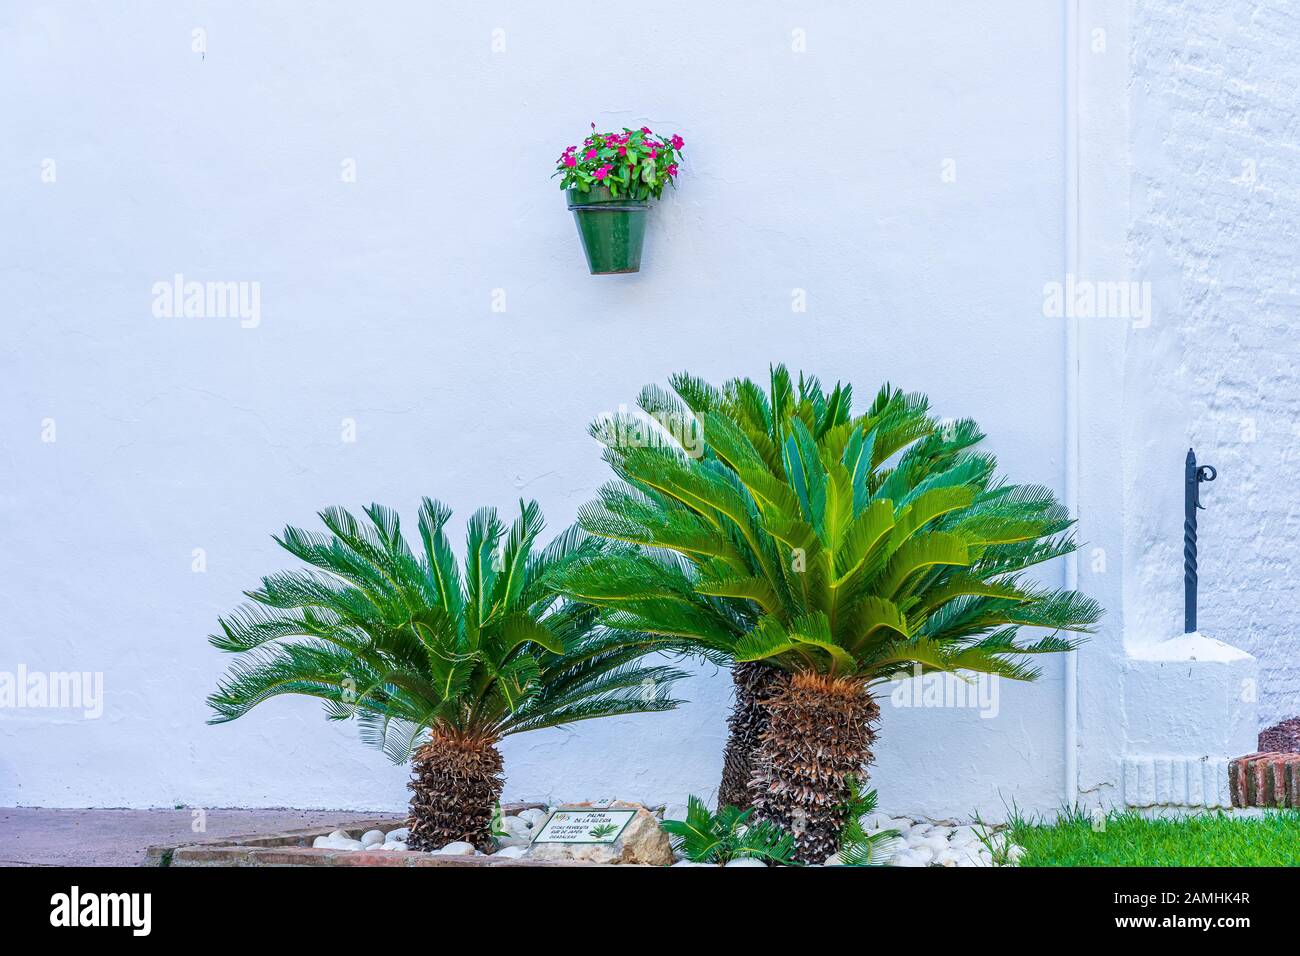 Japanese Sago Palm trees, Cycas revoluta, against a white-washed building in popular tourist location in Mijas, Spain Stock Photo